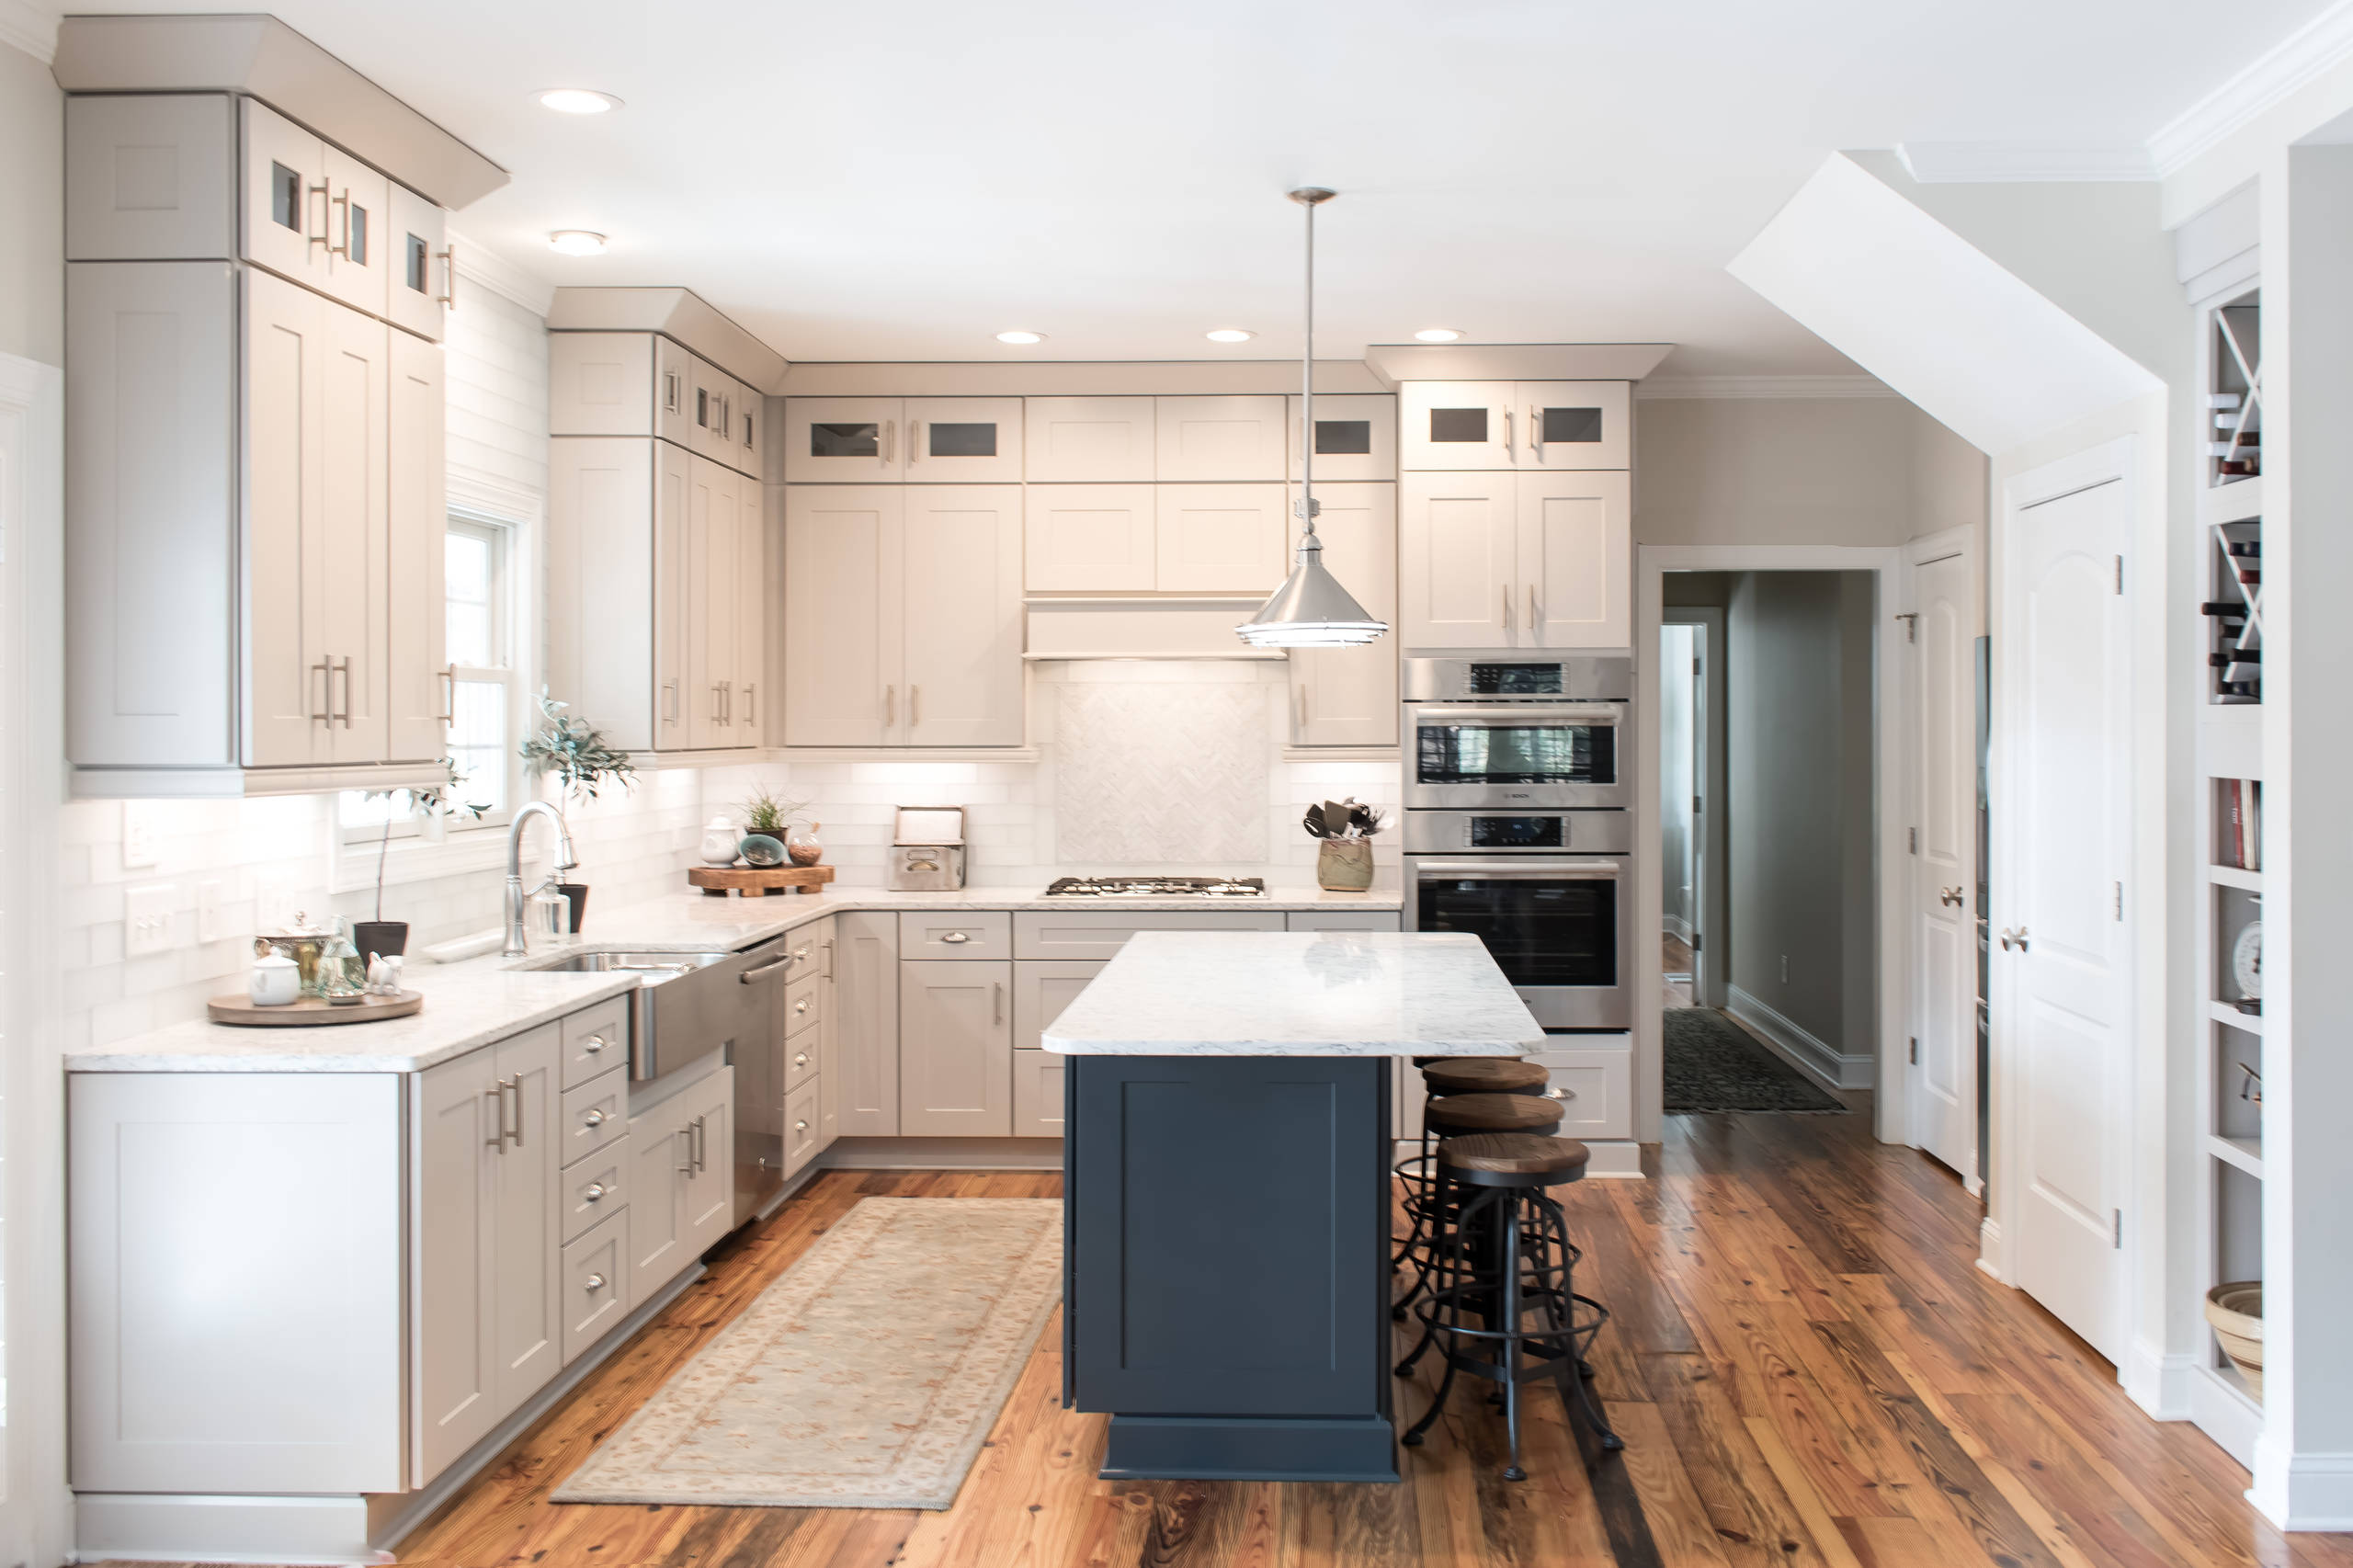 Two Tone Kitchen Schrock Entra Contemporary Kitchen Other By Cabinetry Of Pinehurst Houzz